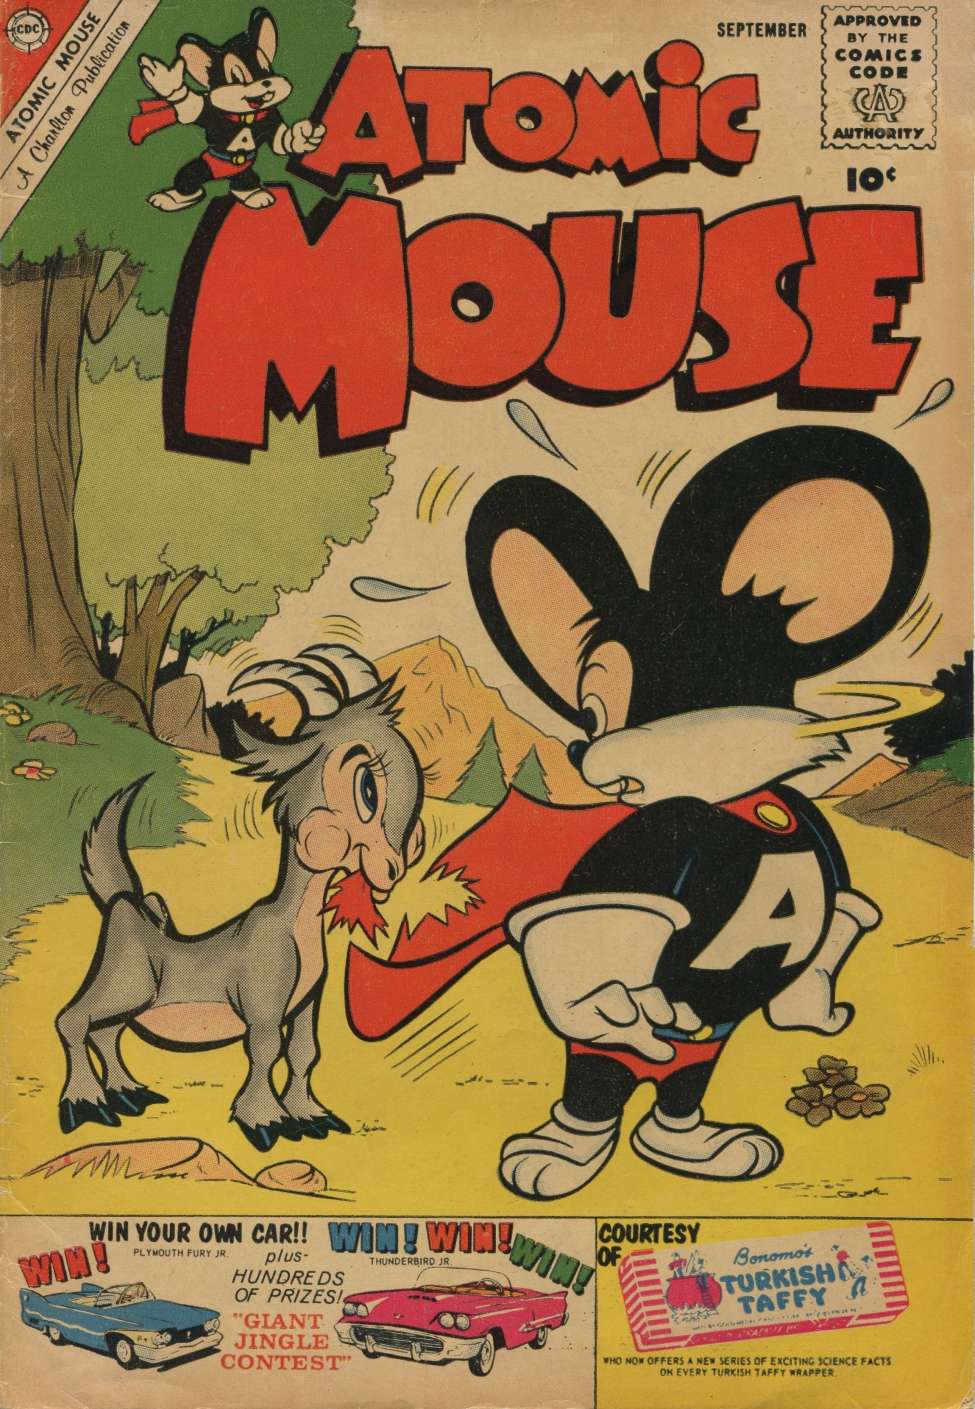 Book Cover For Atomic Mouse 38